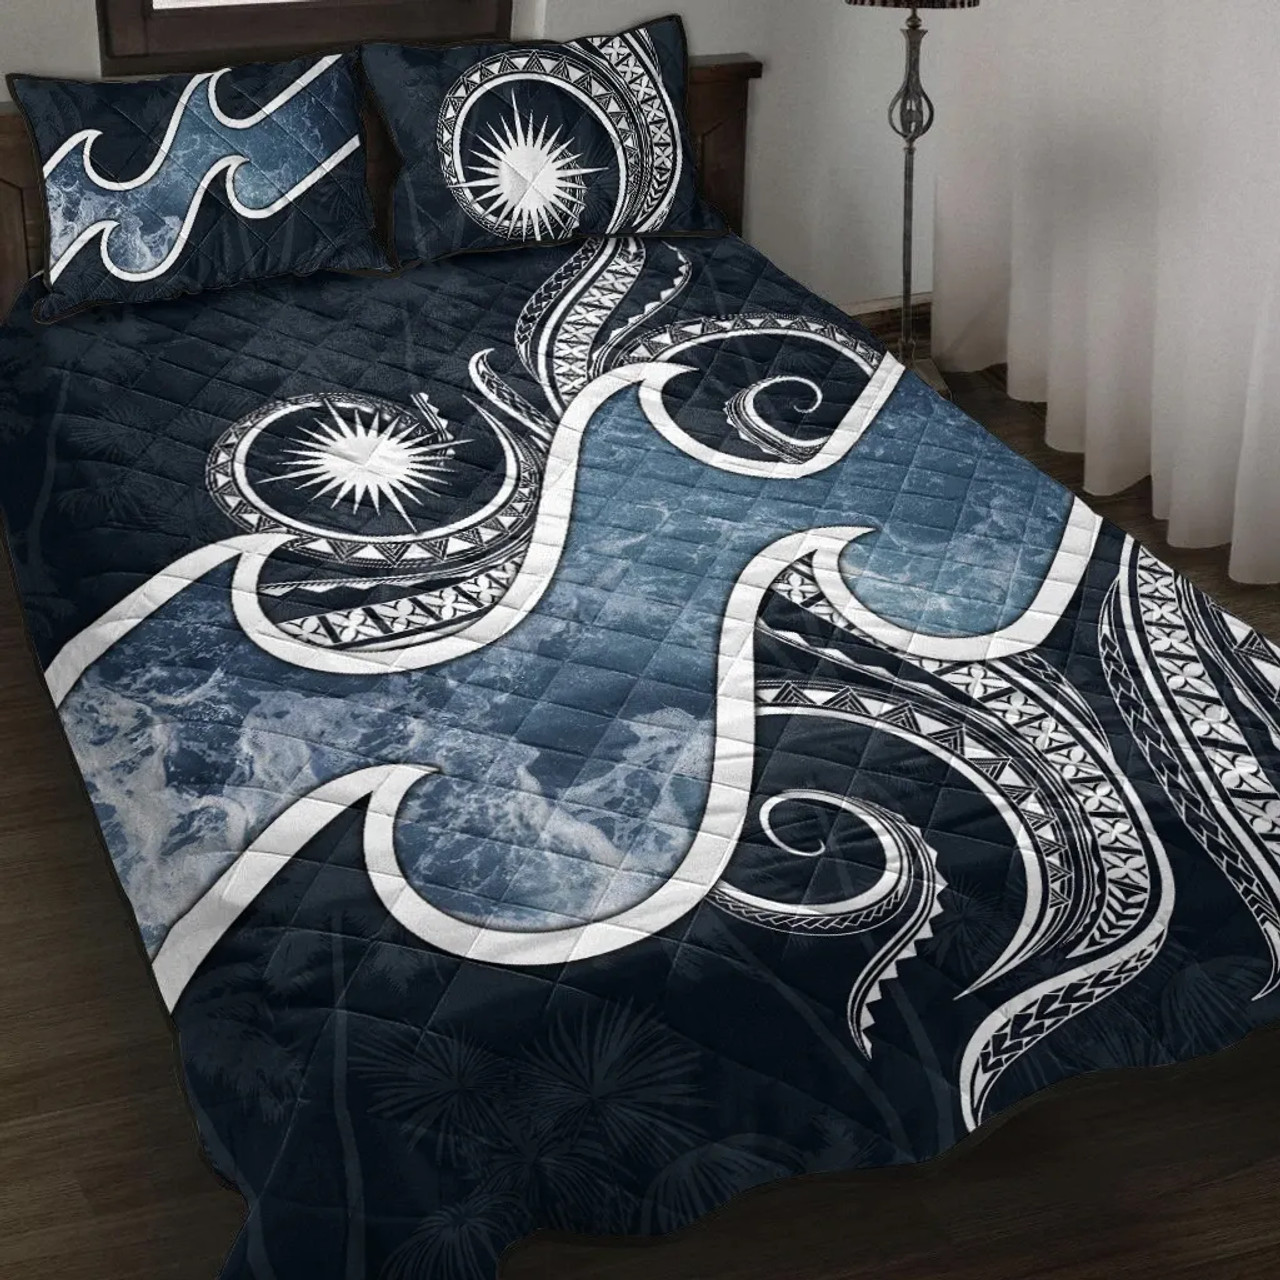 Marshall Islands Polynesian Quilt Bed Set - Ocean Style 1